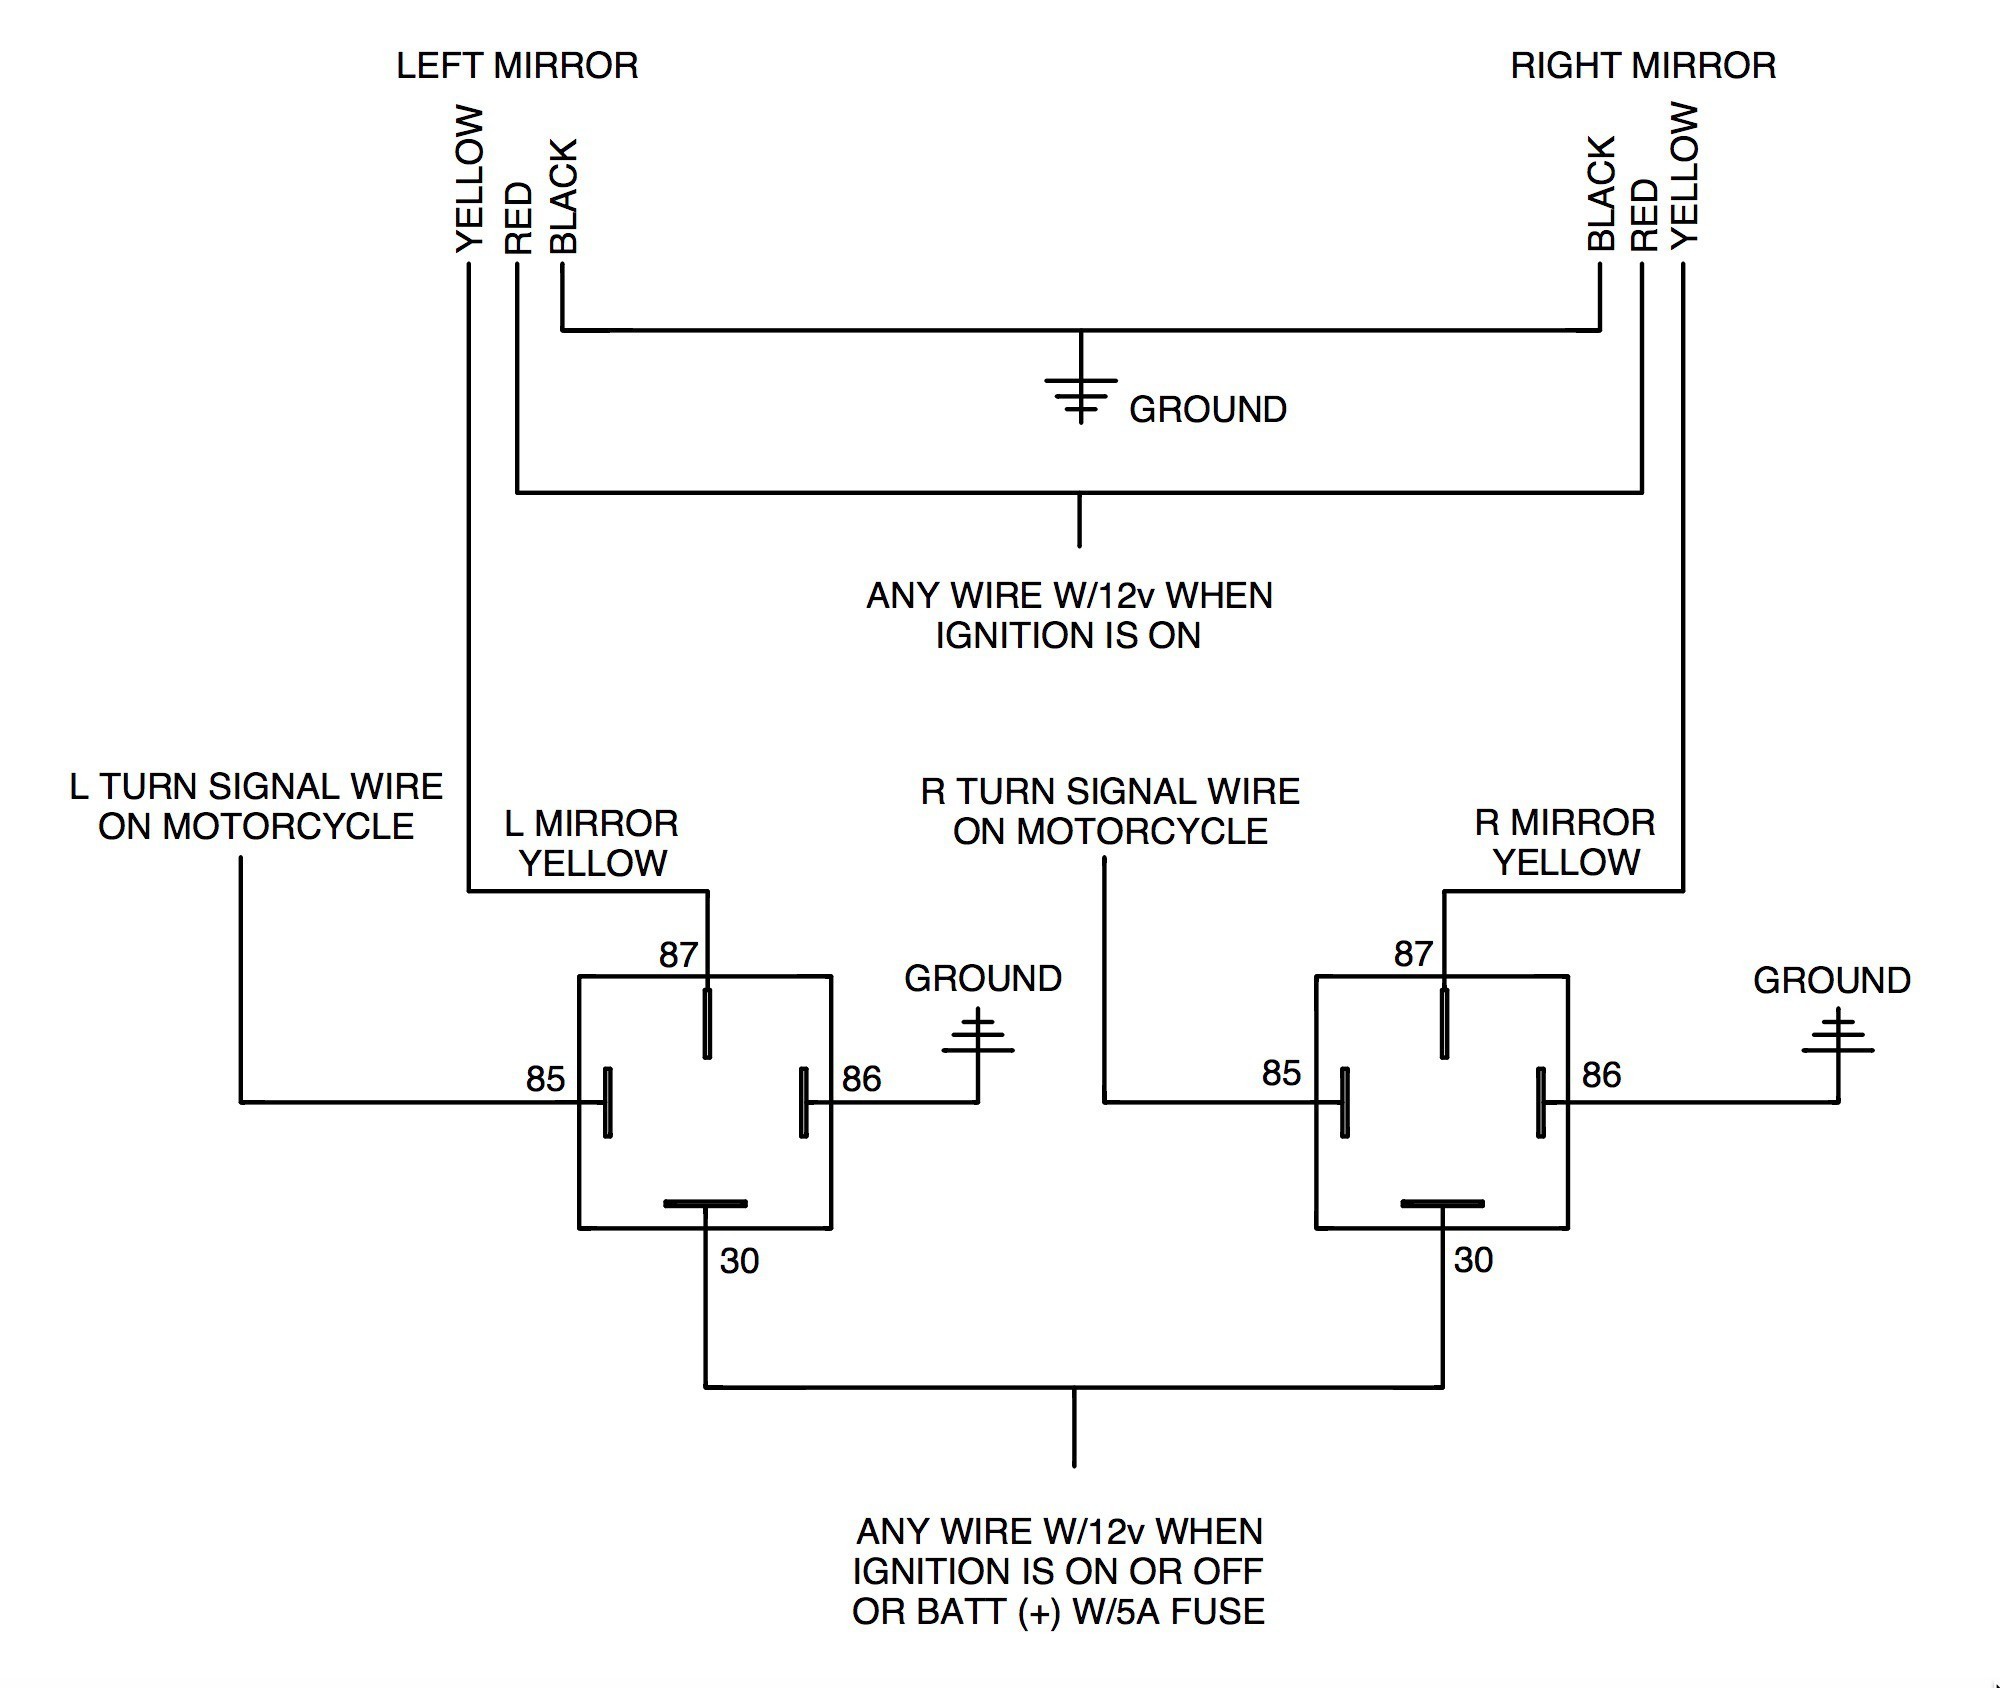 Turn Signal Wiring Diagram Turn Signal Wiring Diagram Luxury Adding Rivco Led Mirrors to A Related Post Car Stereo Wiring Diagram